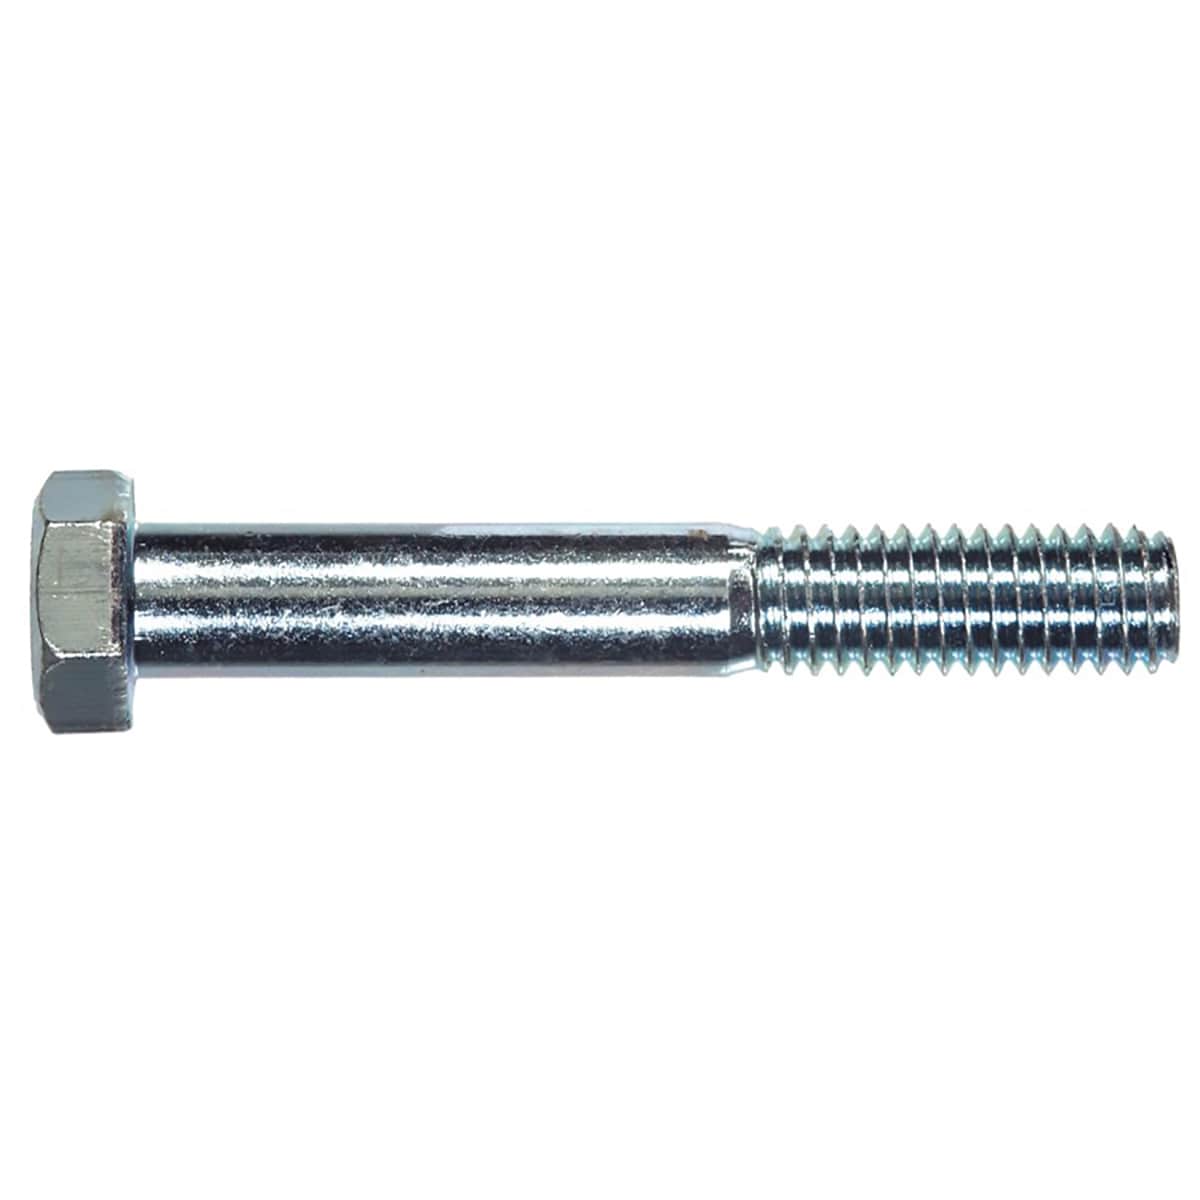 80mm Hex Bolts at